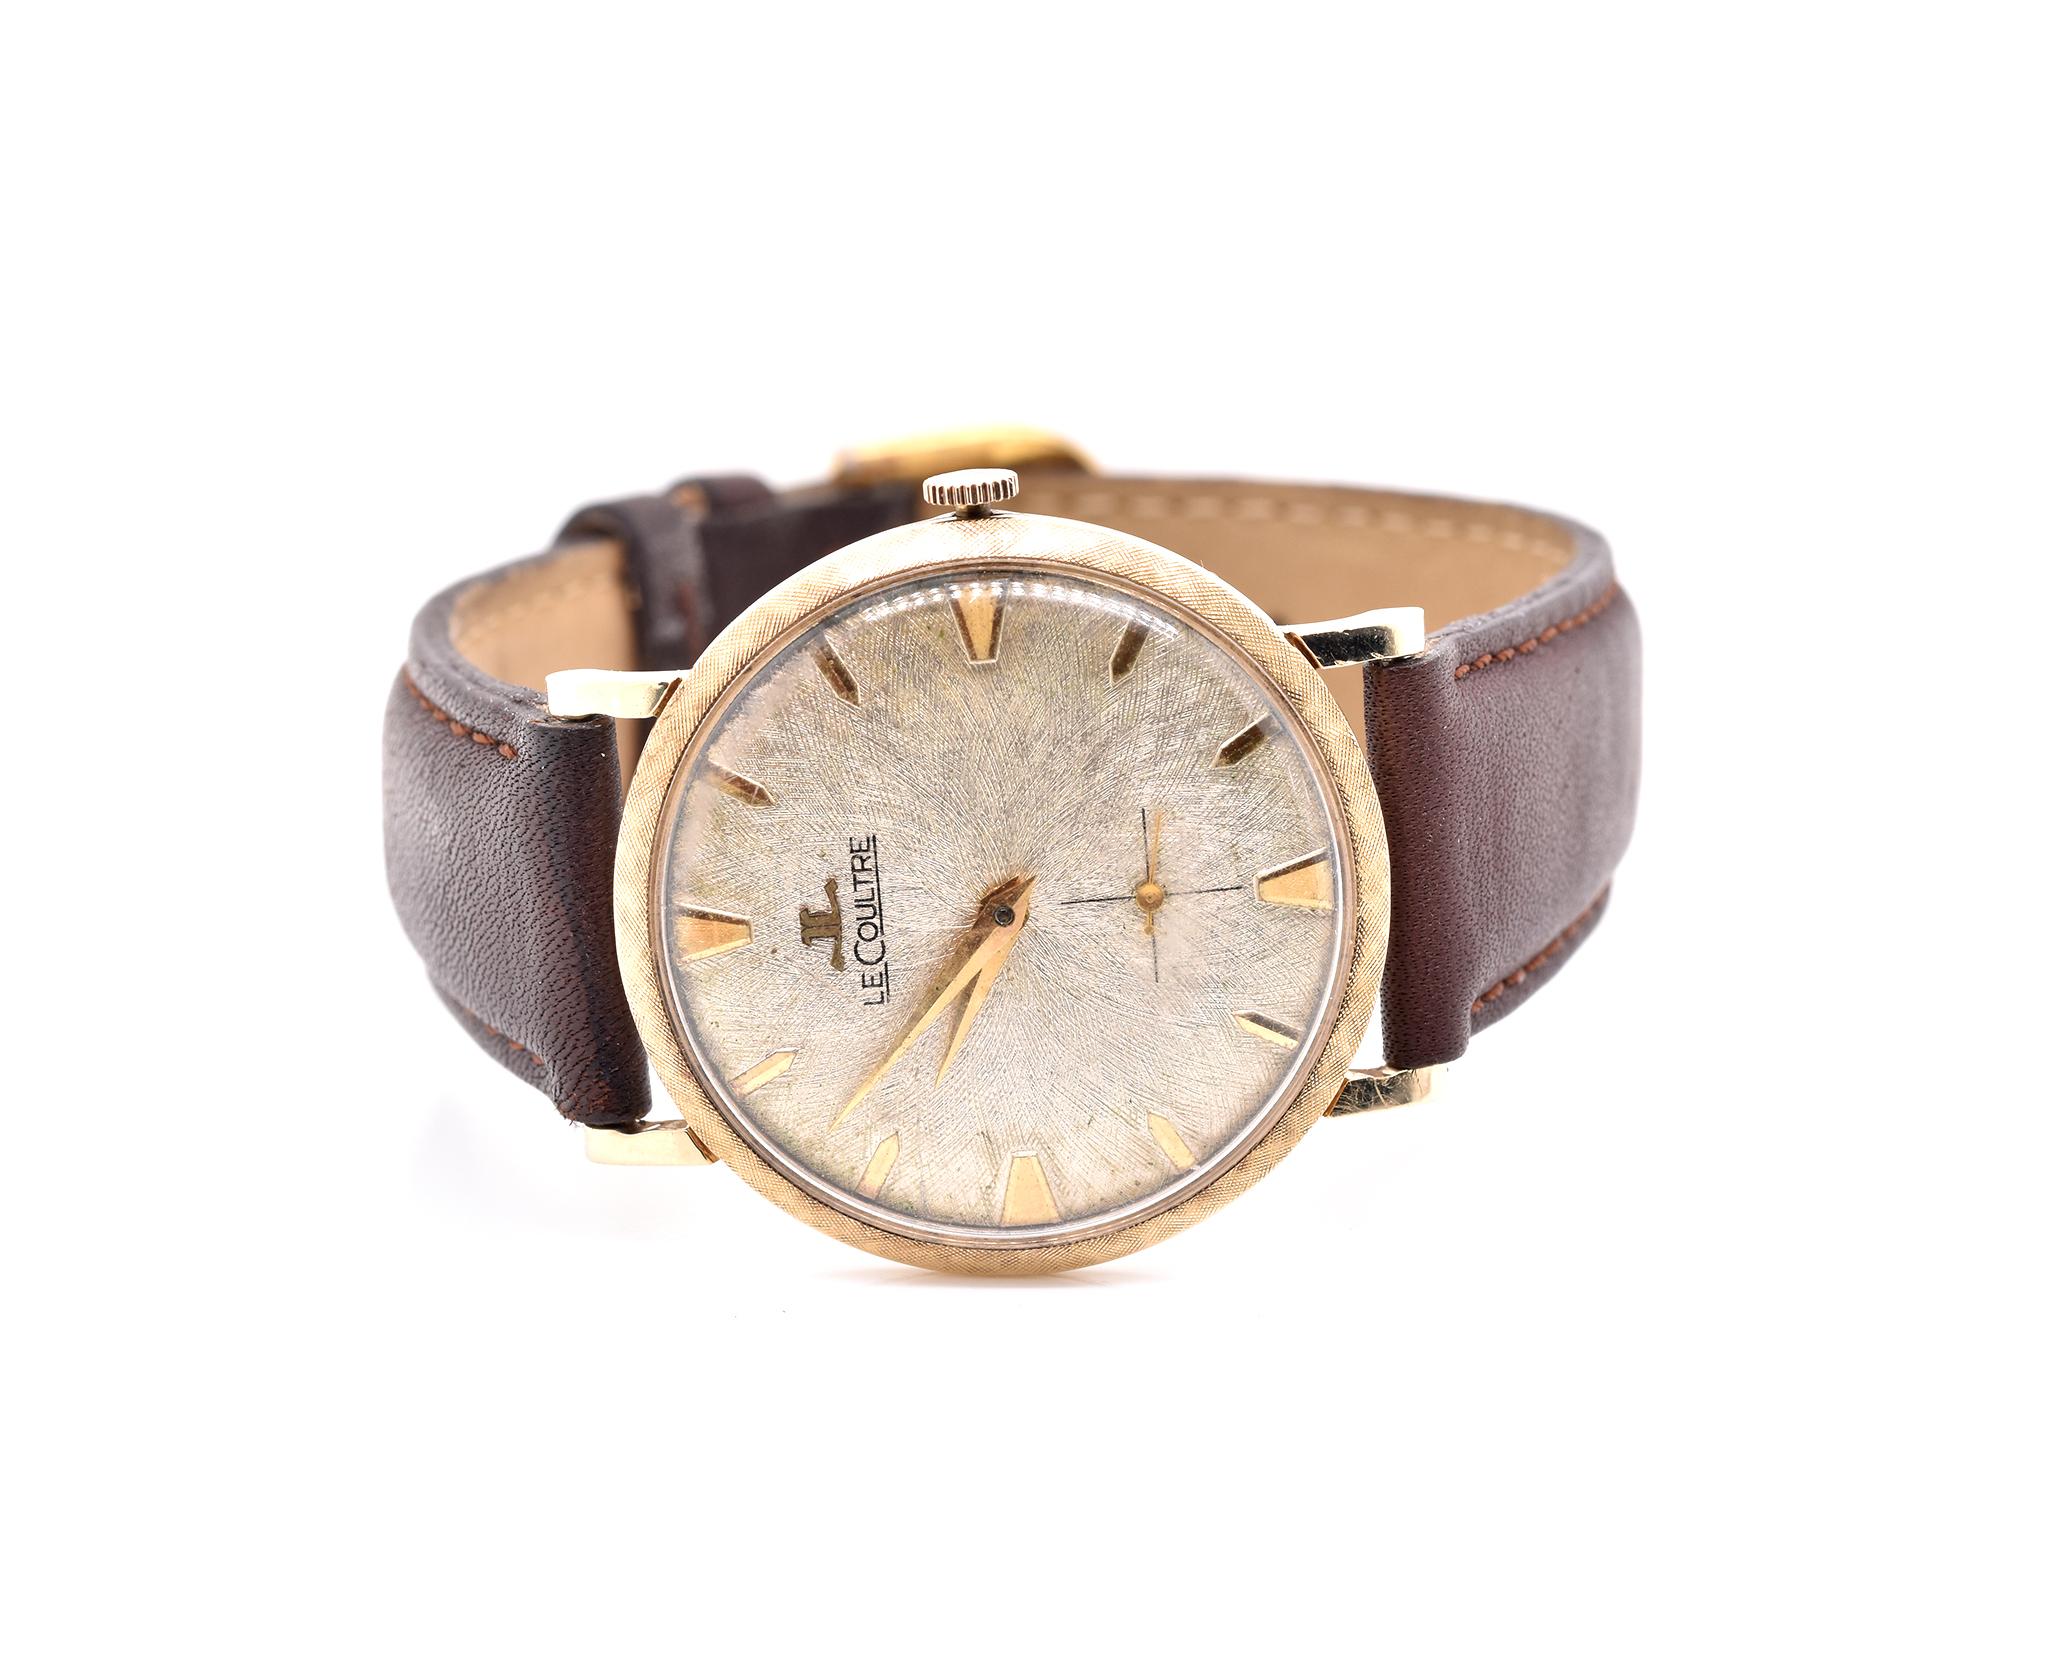 Movement: manual
Function: hours, minutes, seconds
Case: 32mm 14K yellow gold round case, acrylic crystal, push/pull crown
Dial: silver dial, gold hands, stick hour markers
Band: brown leather strap with buckle
Reference #: Vintage Gents
Case Serial